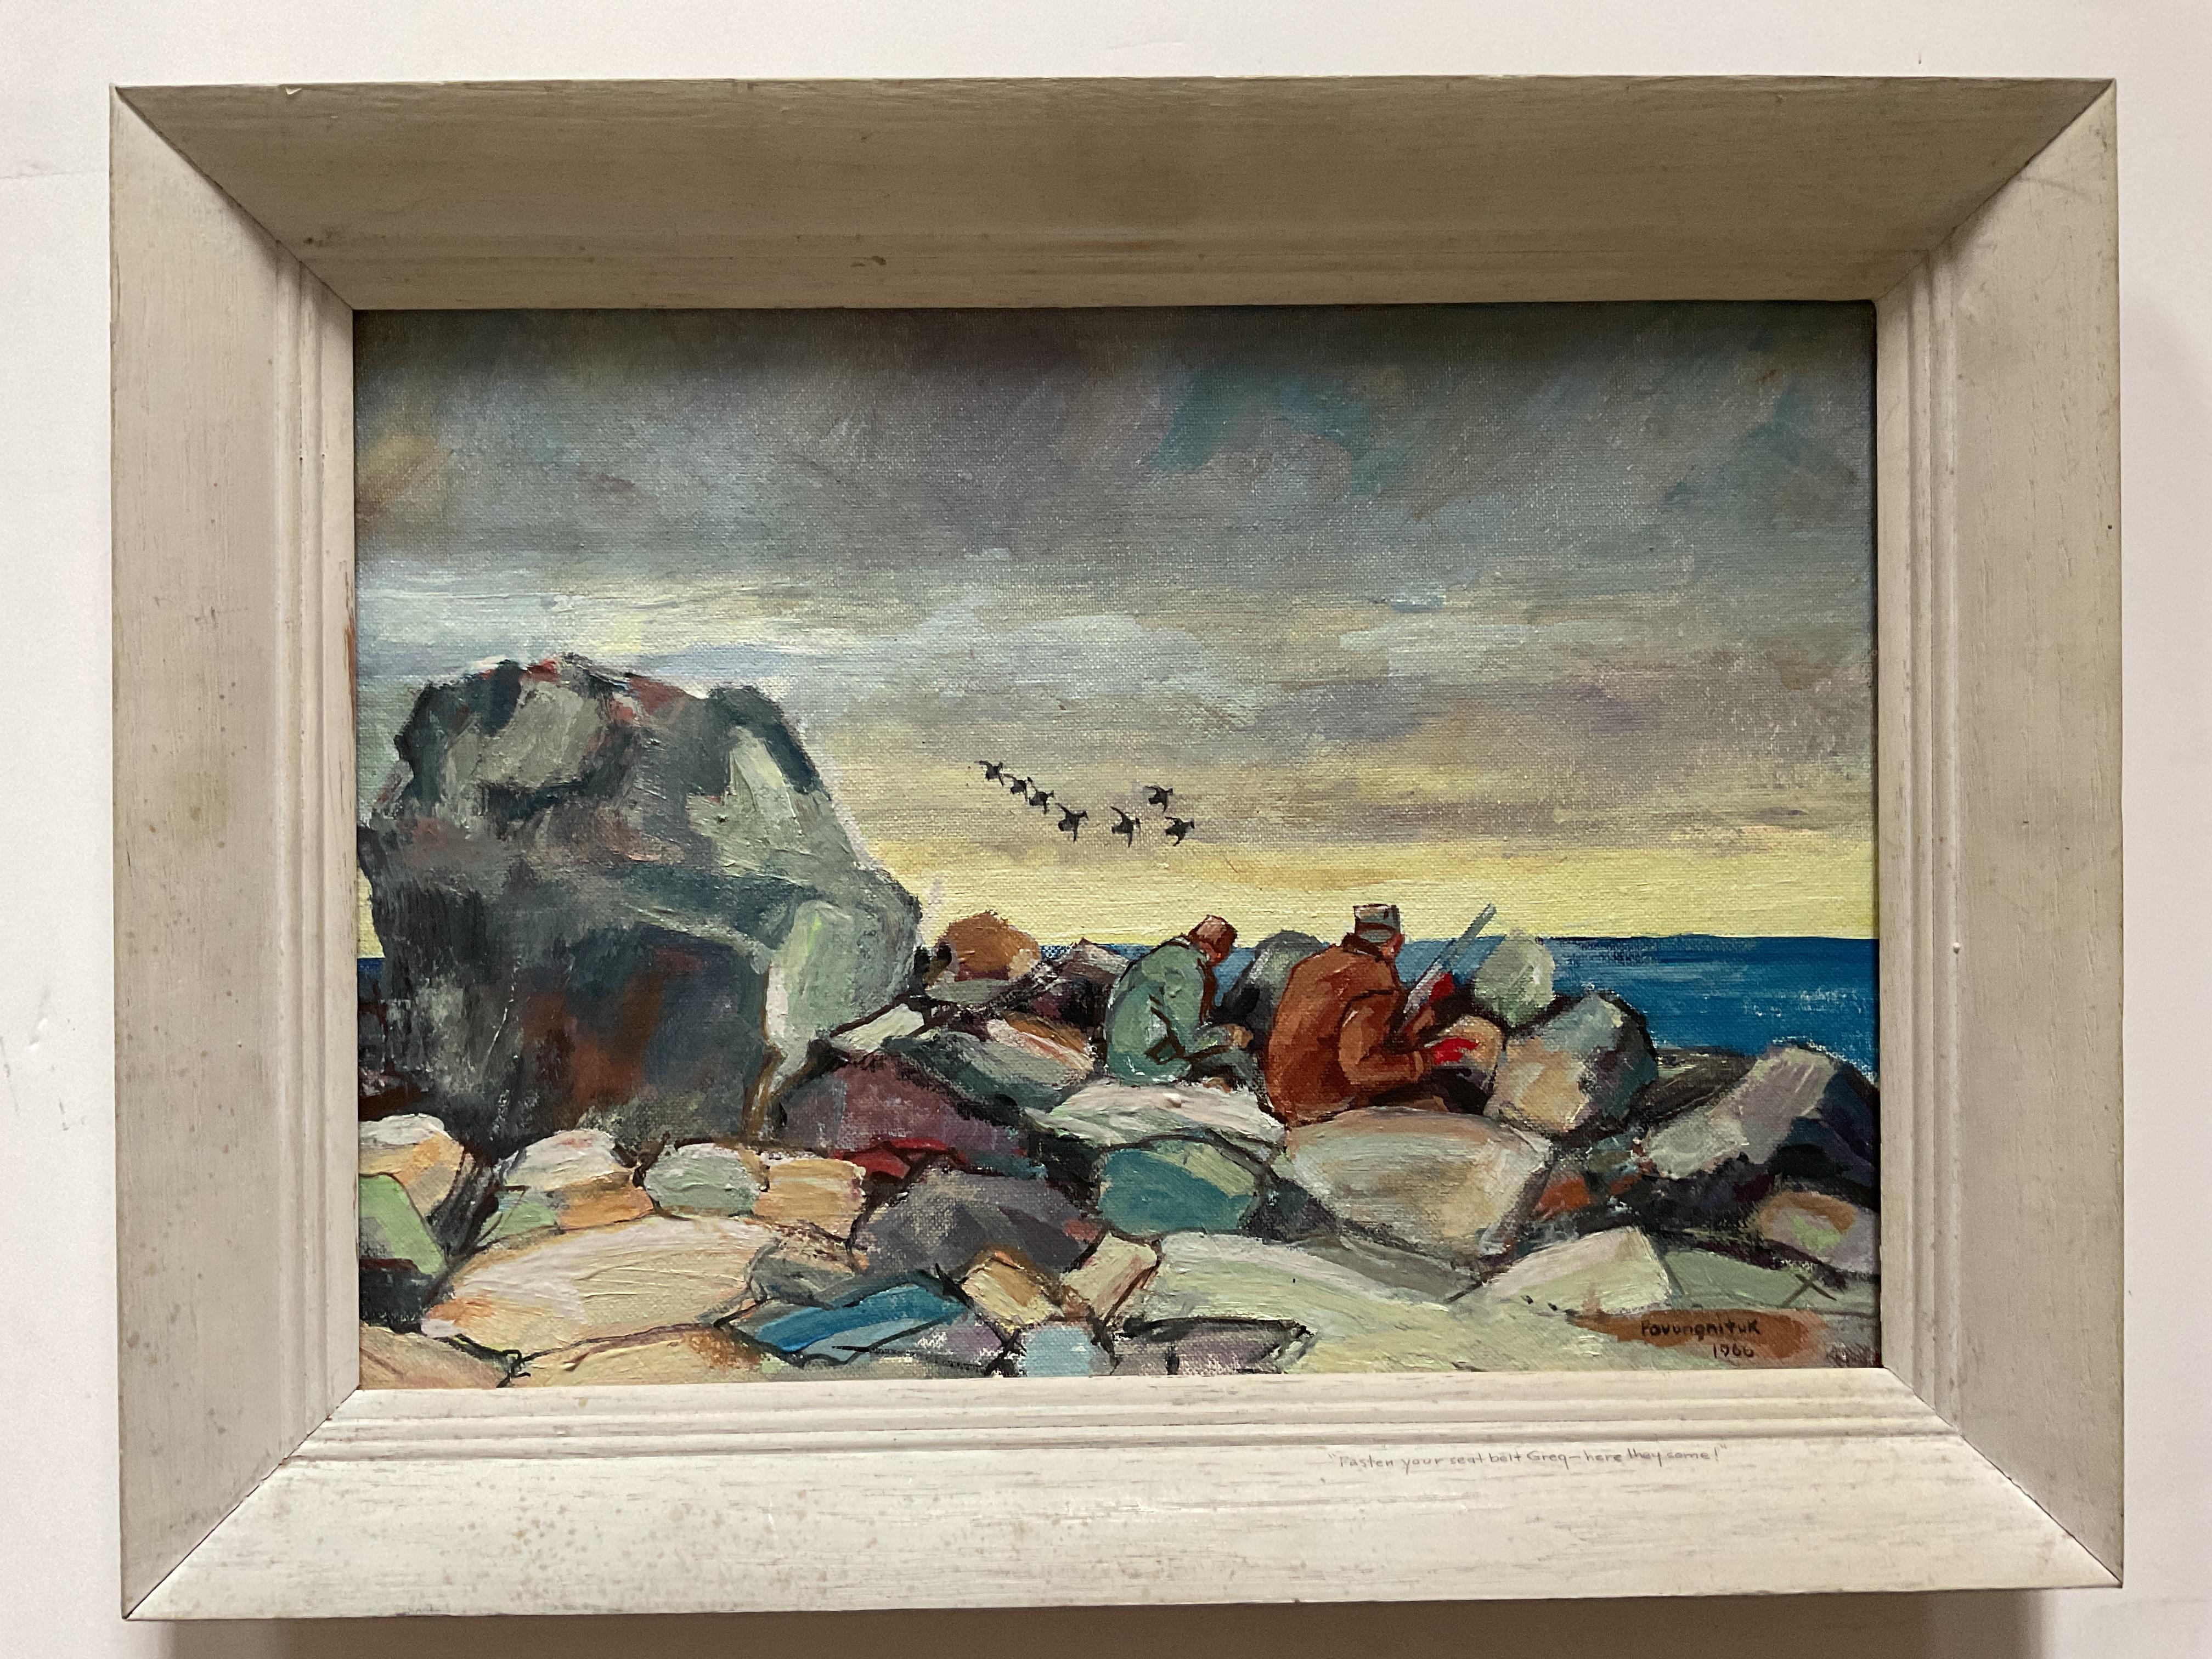 This colorful painting of two duck hunters on a trip to the eastern side of the Hudson Bay in Canada is done in a modernist style.  Unsigned, the work includes an abstracted rocky coastline against the blue waters of the open bay. The rocks are